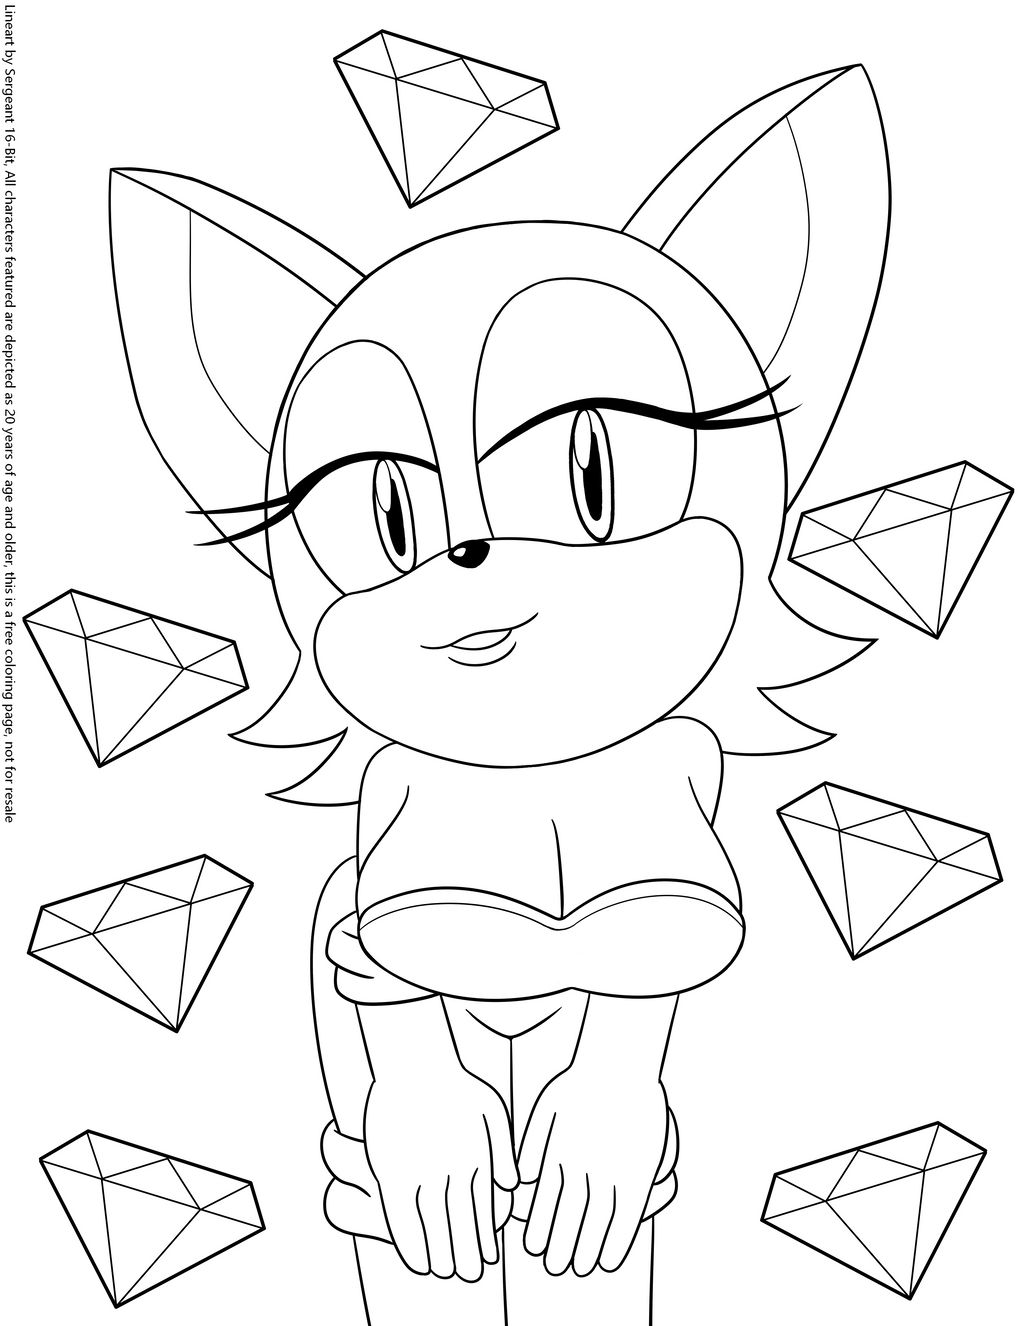 Rouge the bat freebie coloring page by sergeantbit on